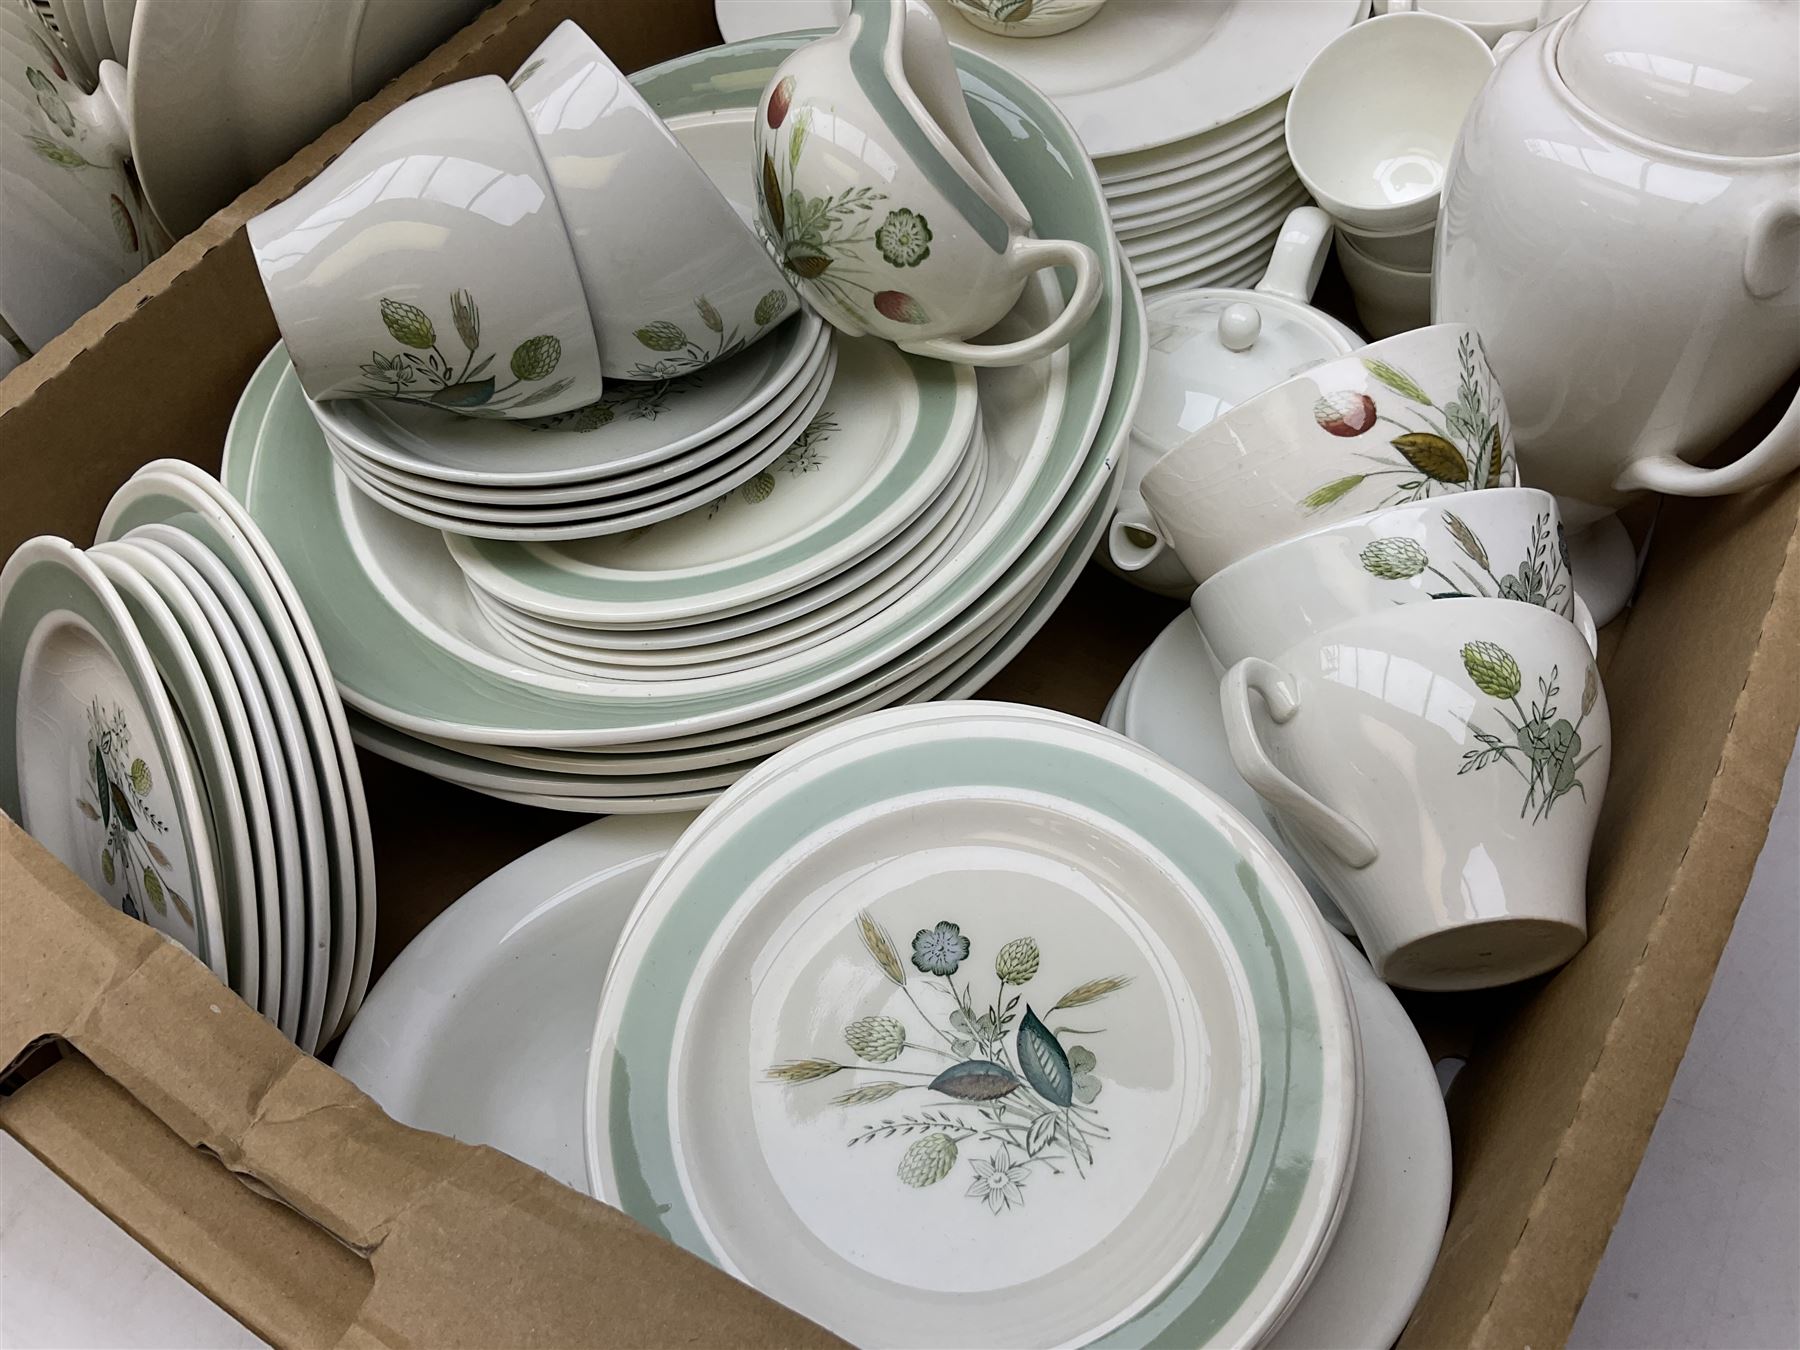 Wood & Sons Clovelly pattern tea and dinner wares - Image 7 of 10